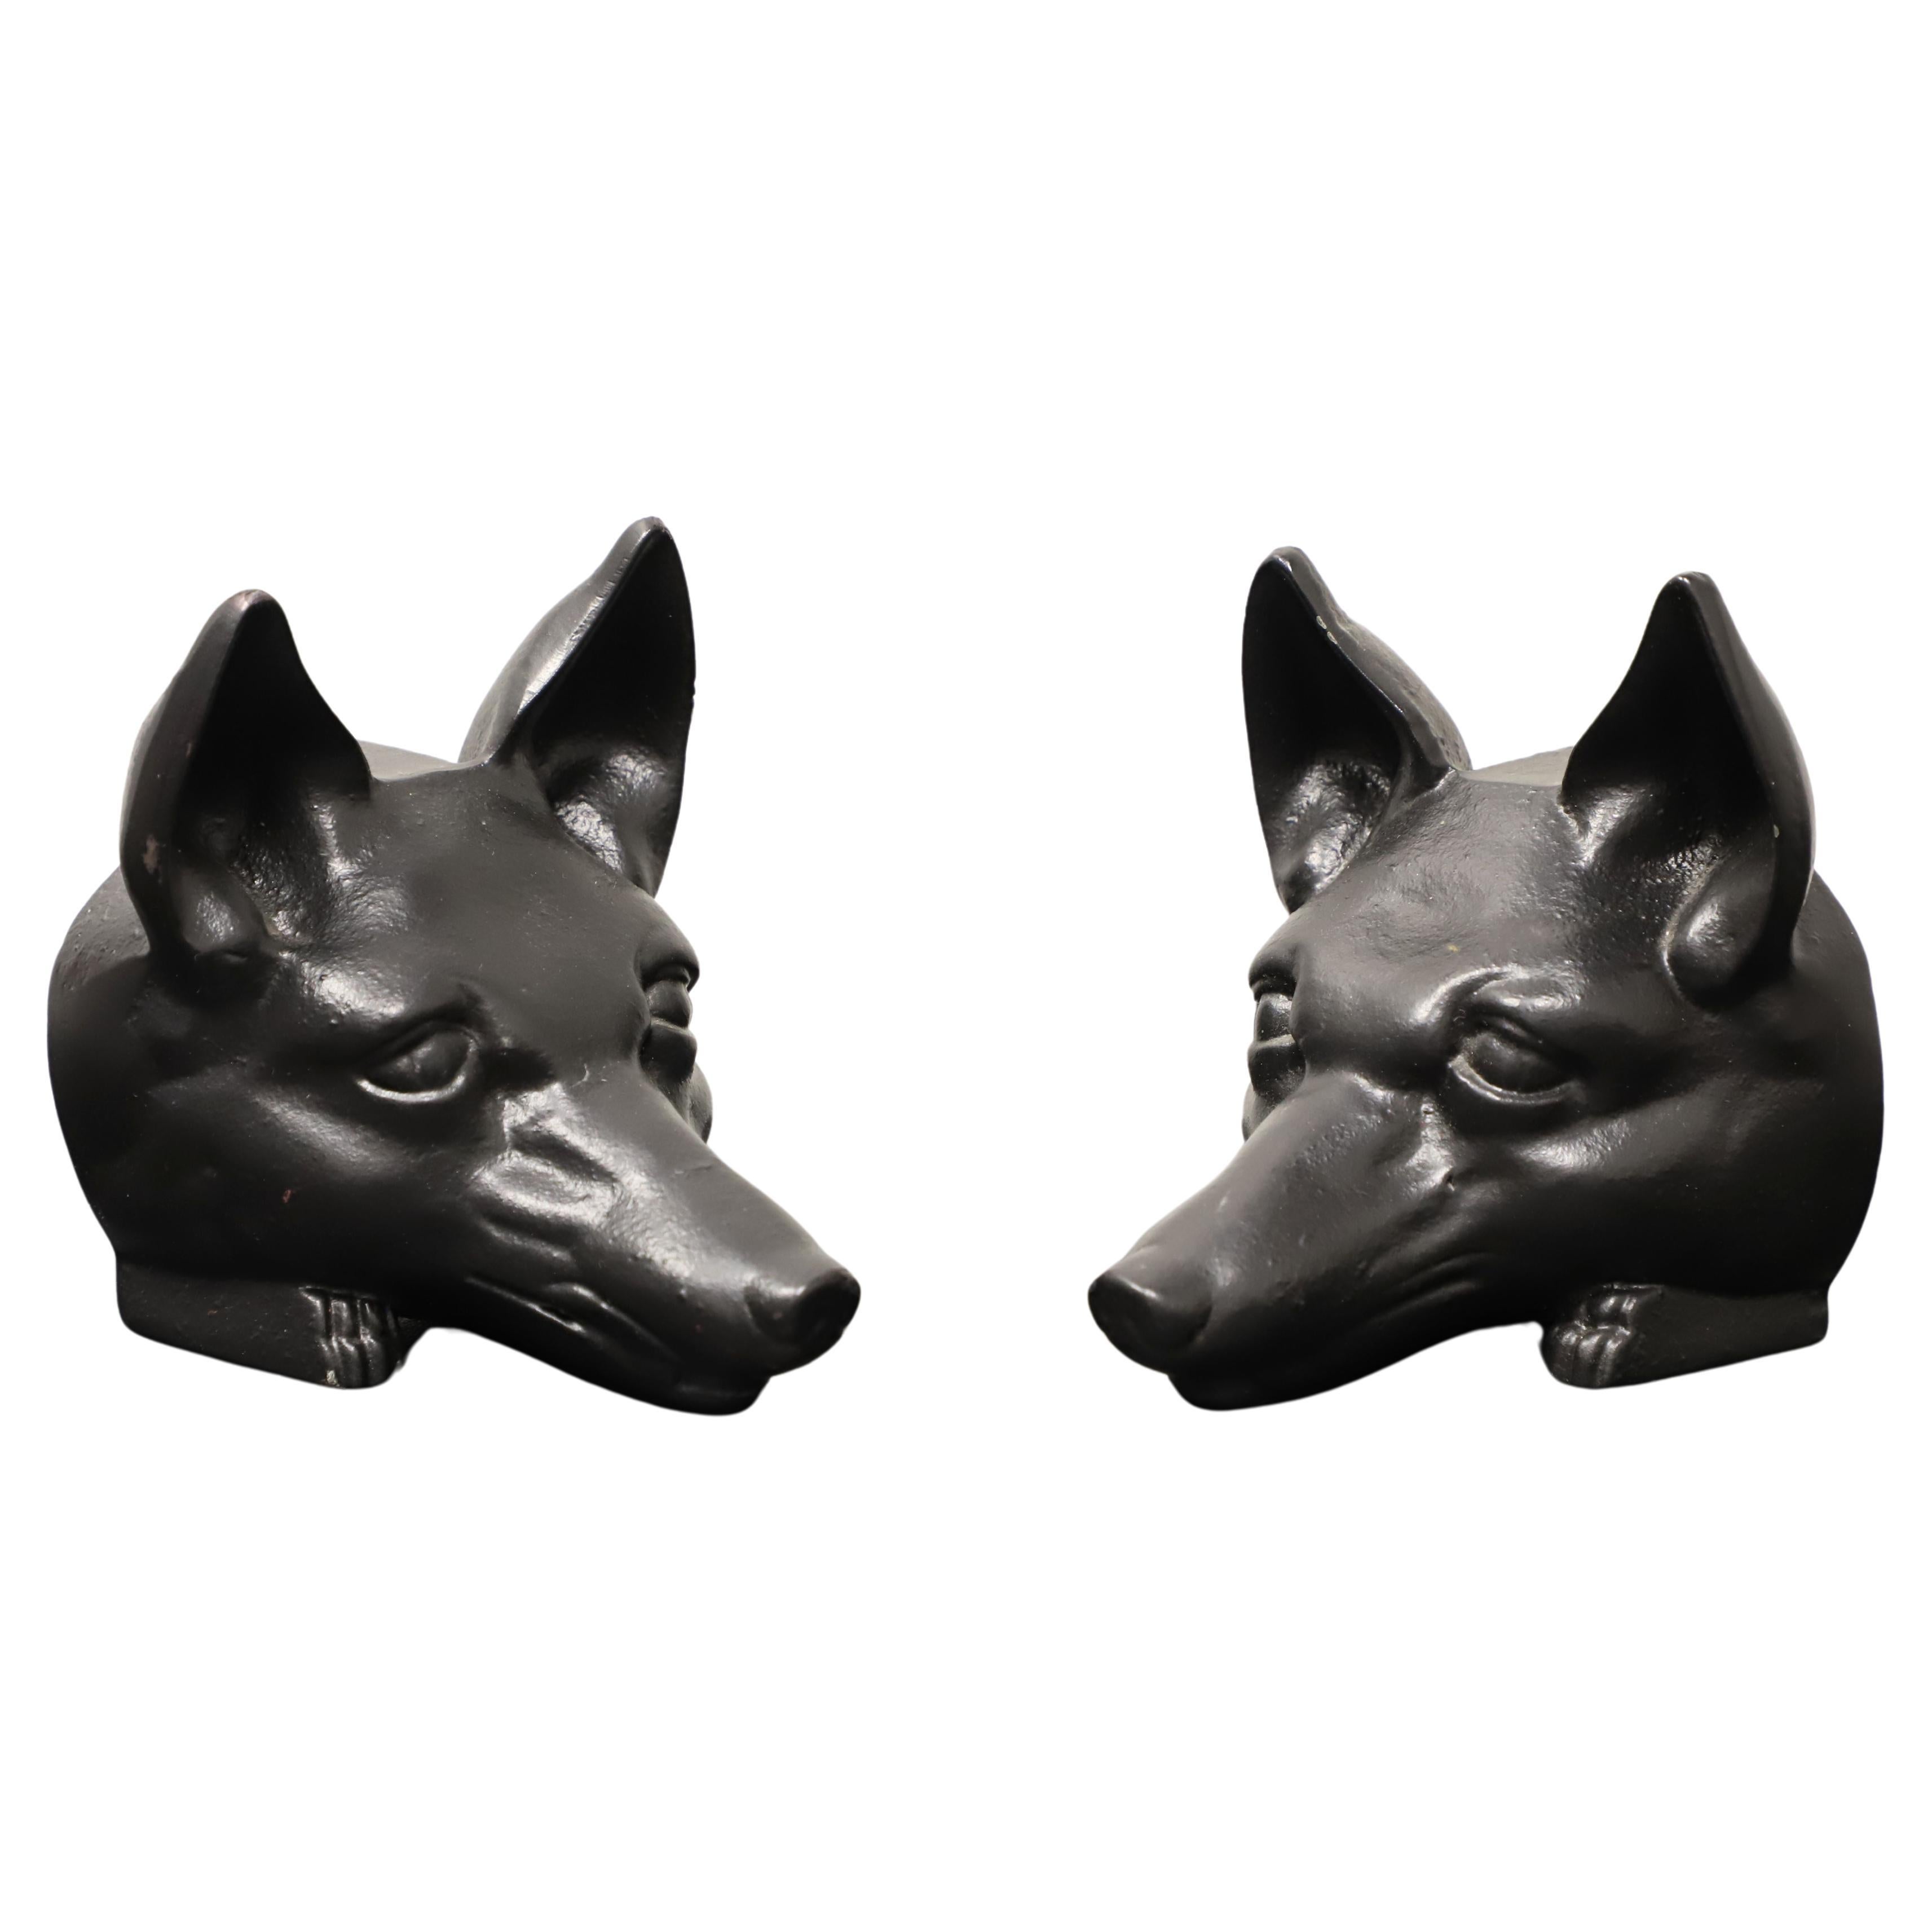 VIRGINIA METALCRAFTERS Cast Iron Fox Head Bookends - Pair For Sale